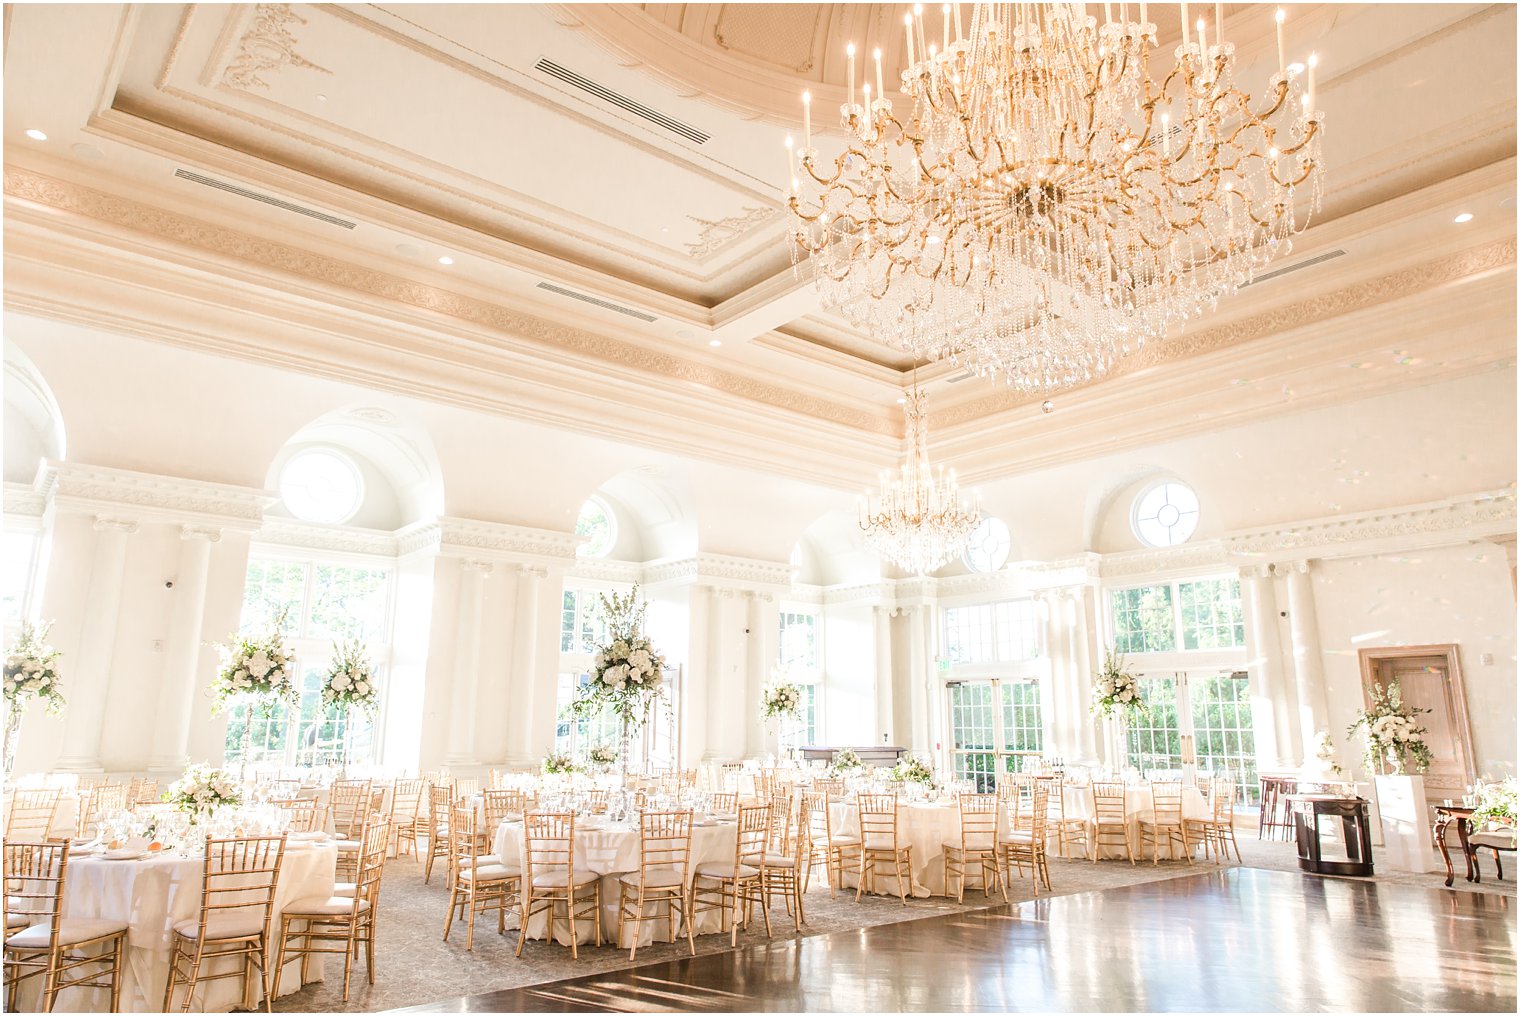 Park Chateau Estate and Gardens Wedding Reception Room